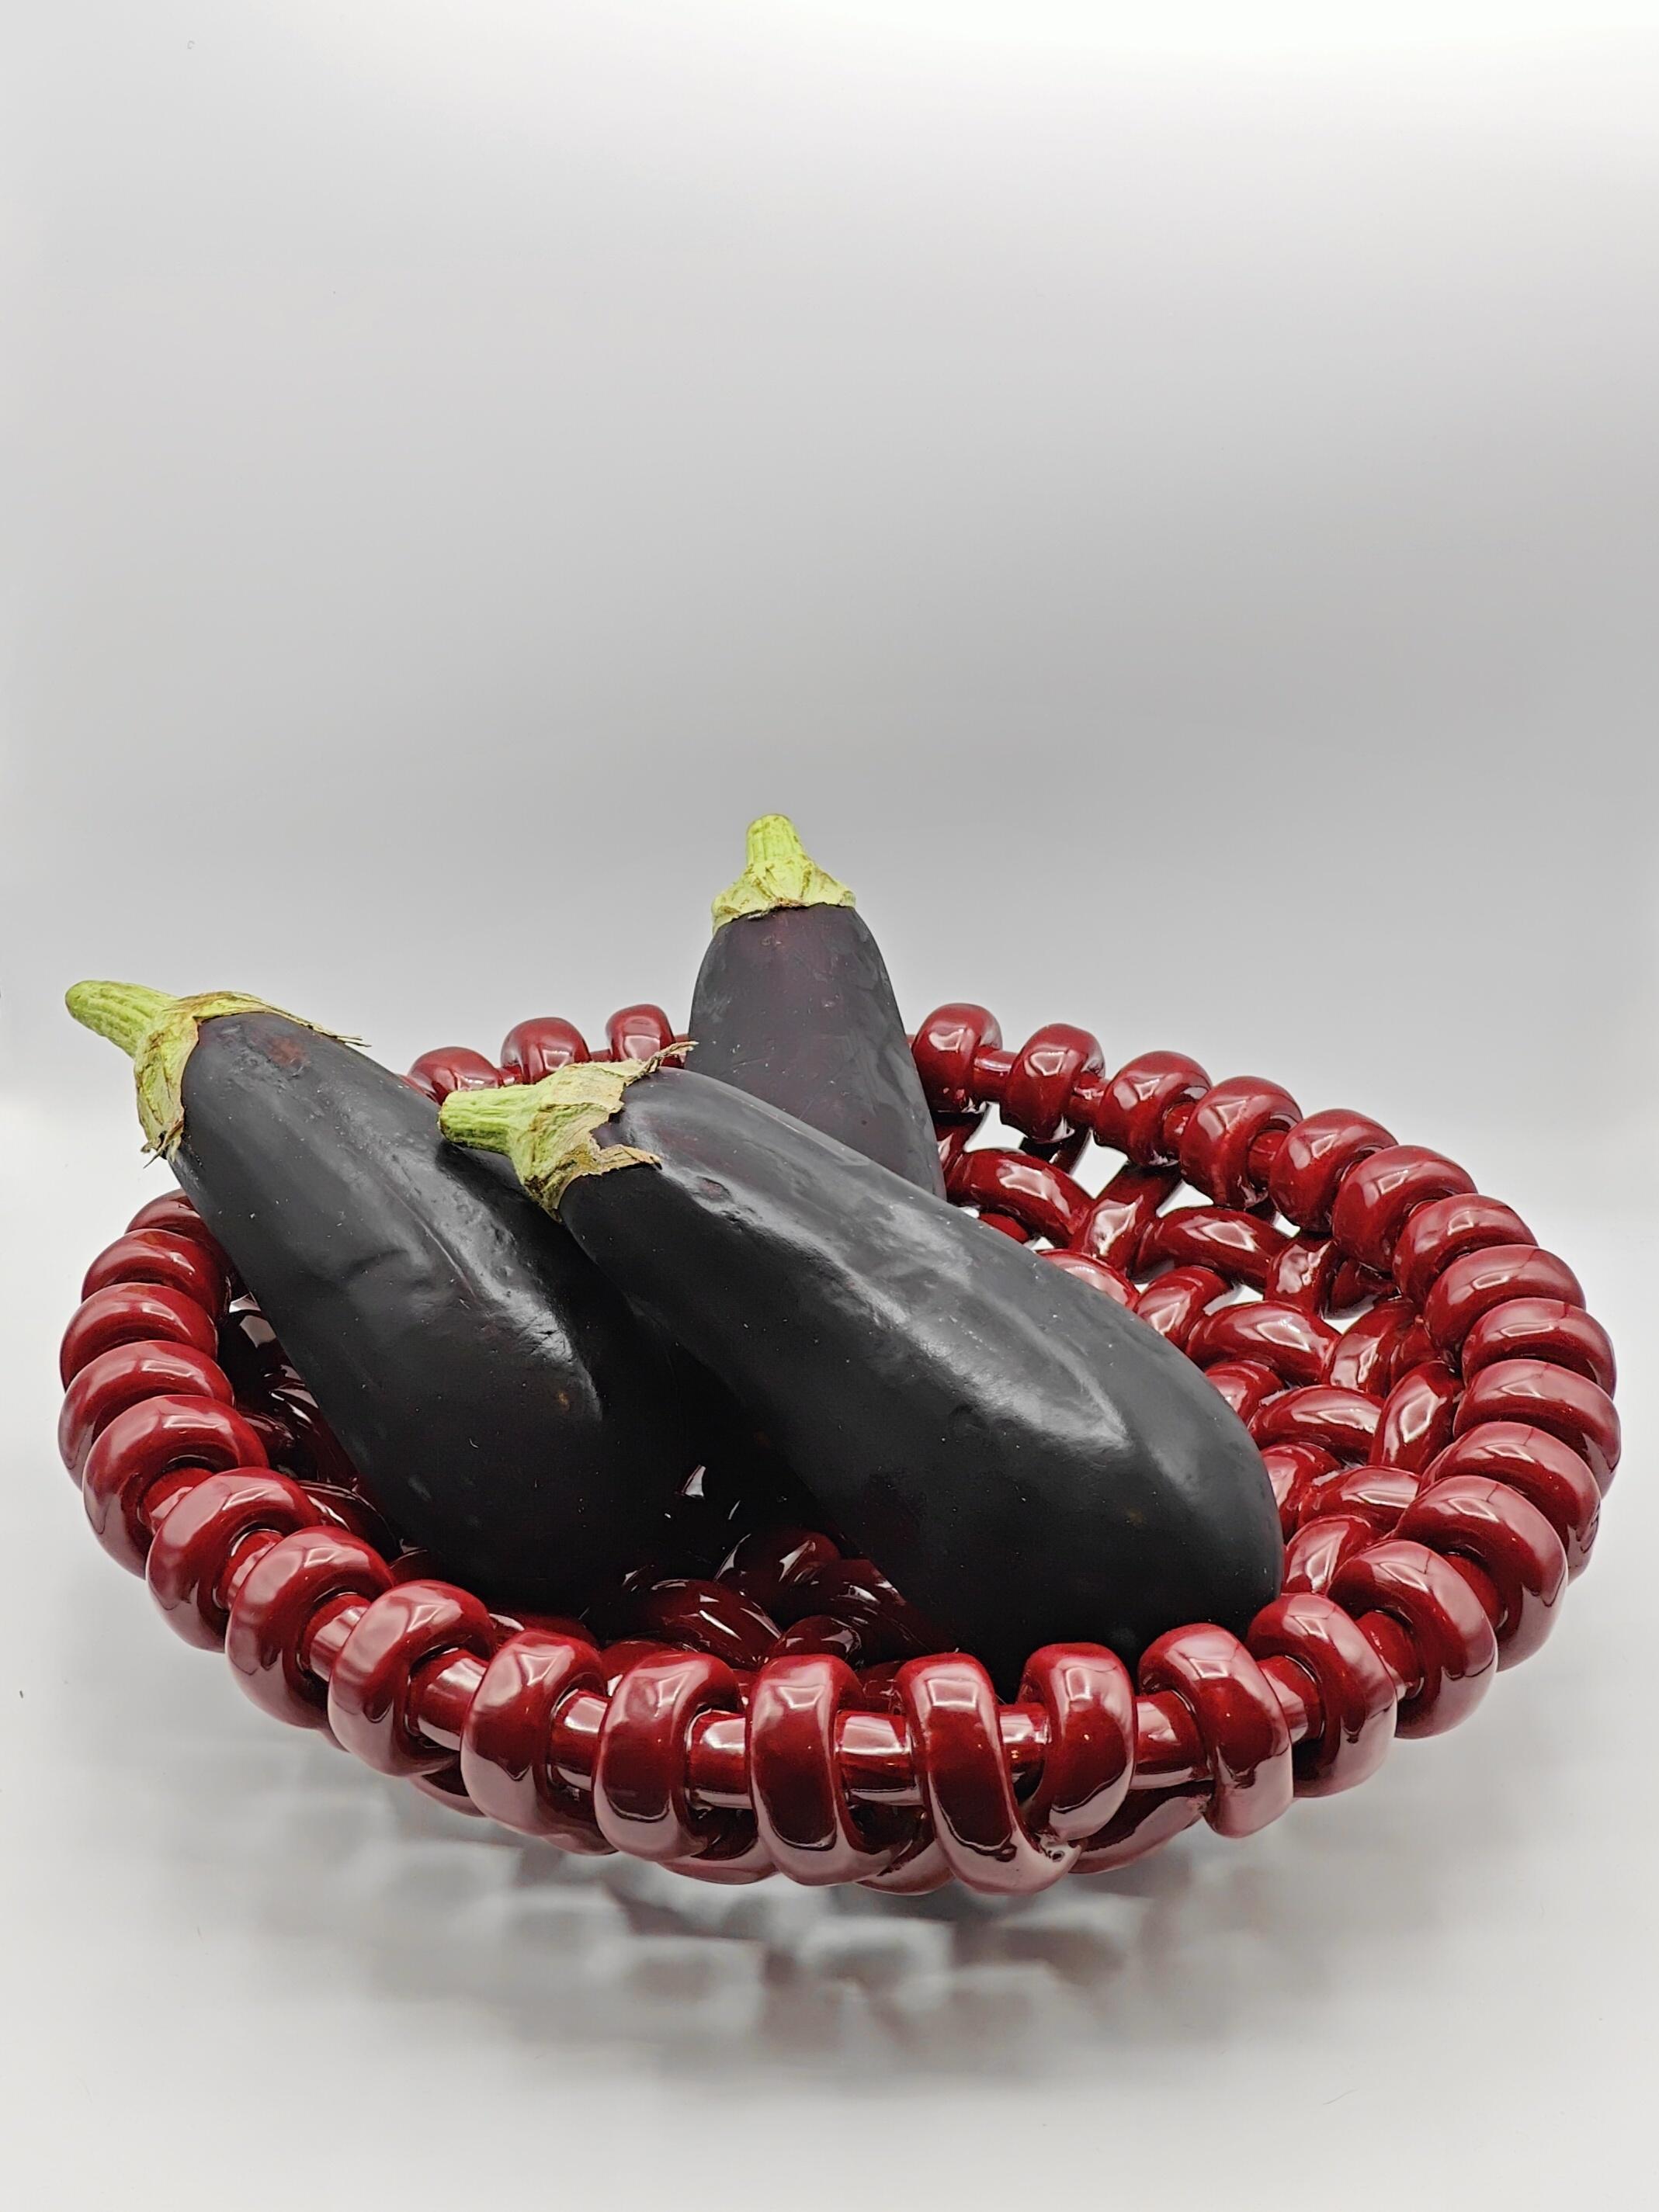 Magnificent centerpiece or fruit bowl by Jérôme Massier in enamelled ceramic from the 1950s in Vallauris, France. 

This sang-de-boeuf red is sparkling and gives a groovy touch to your decoration. 
This dish is from the 1950s and has some damage